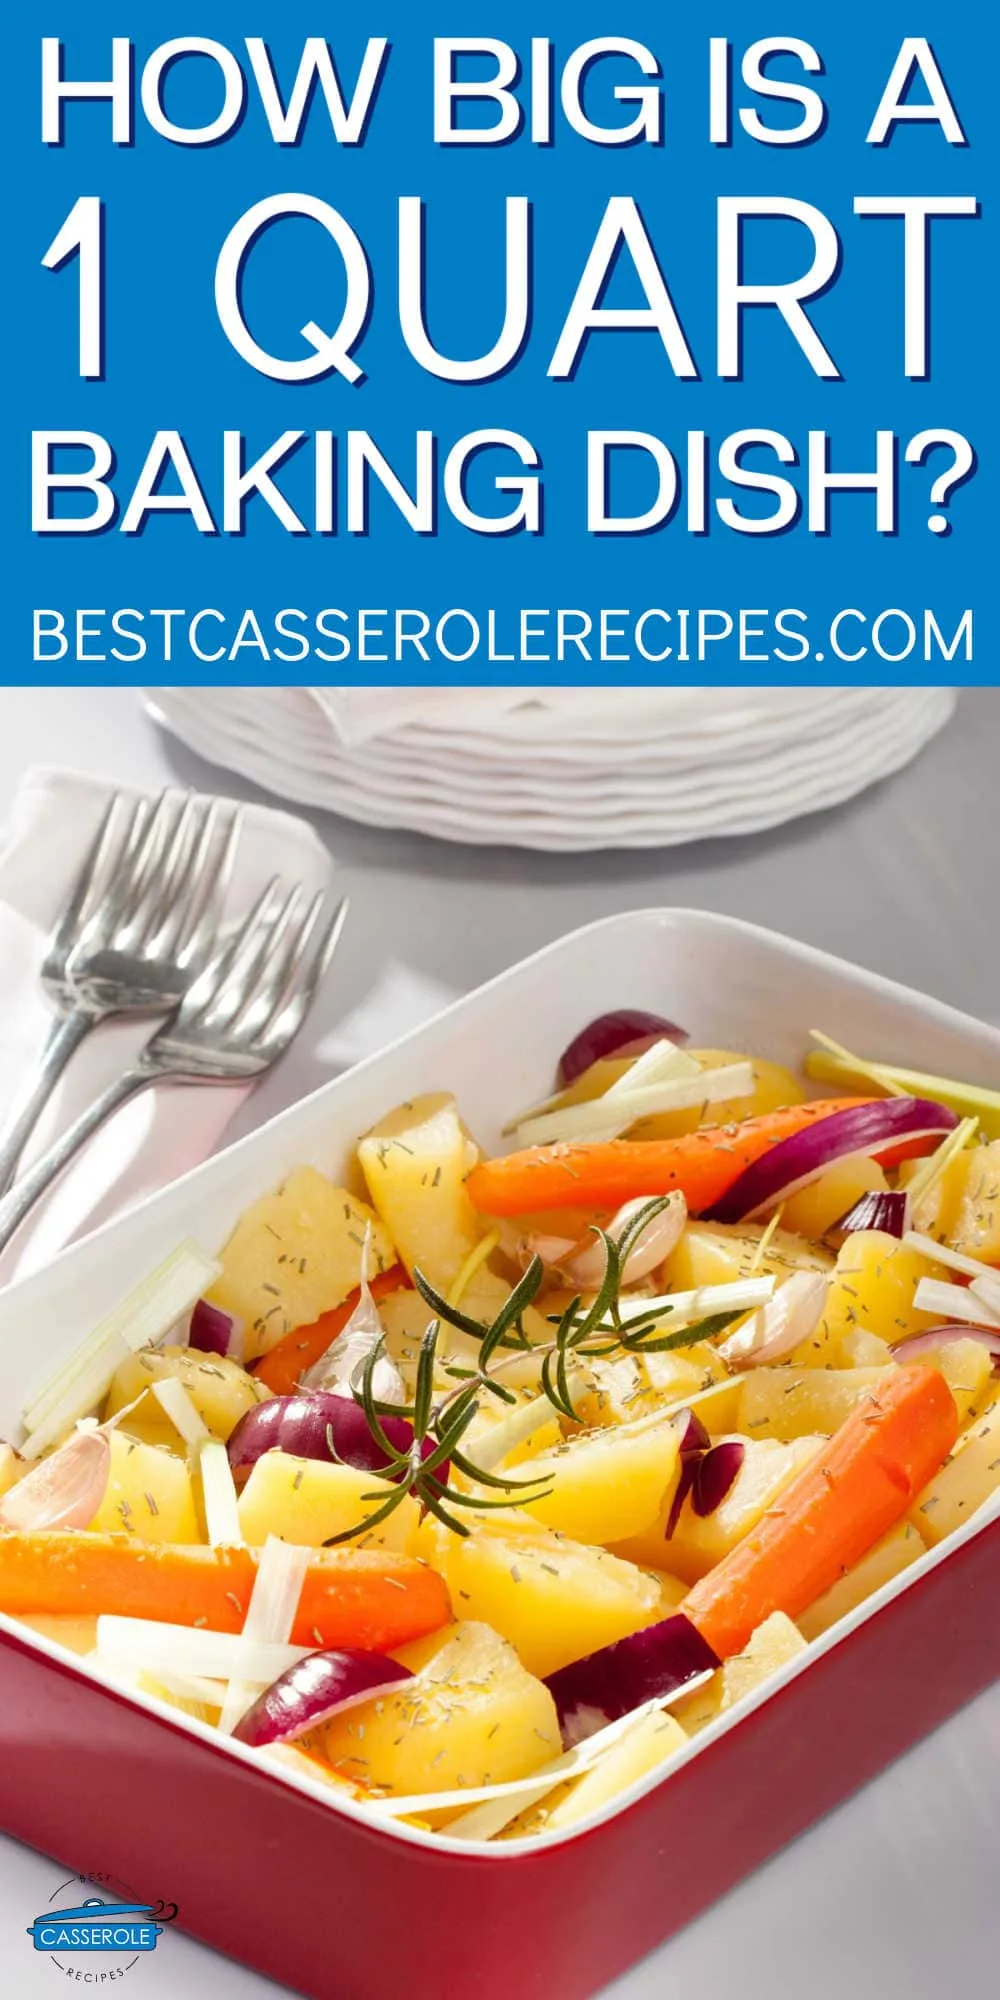 red baking dish with roasted vegetables and blue banner with text